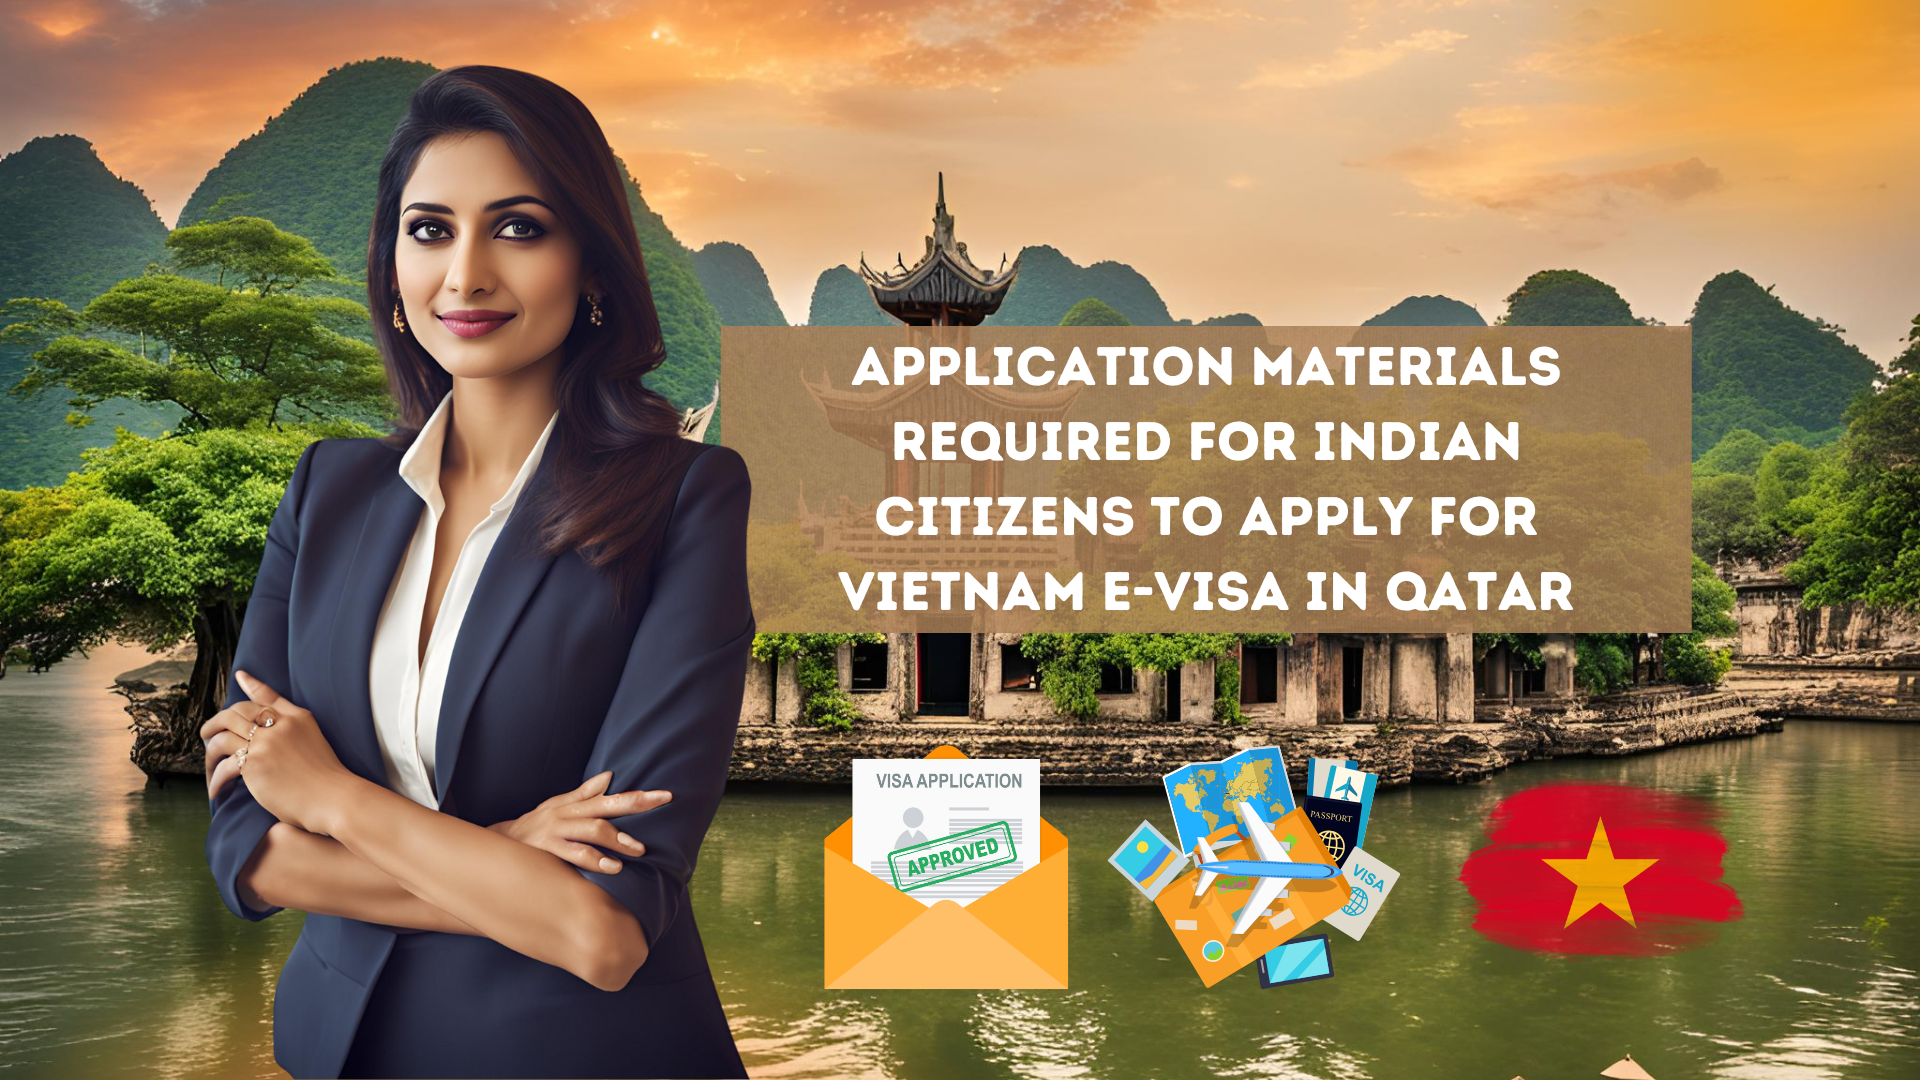 Application materials required for Indian citizens to apply for Vietnam e-visa in Qatar